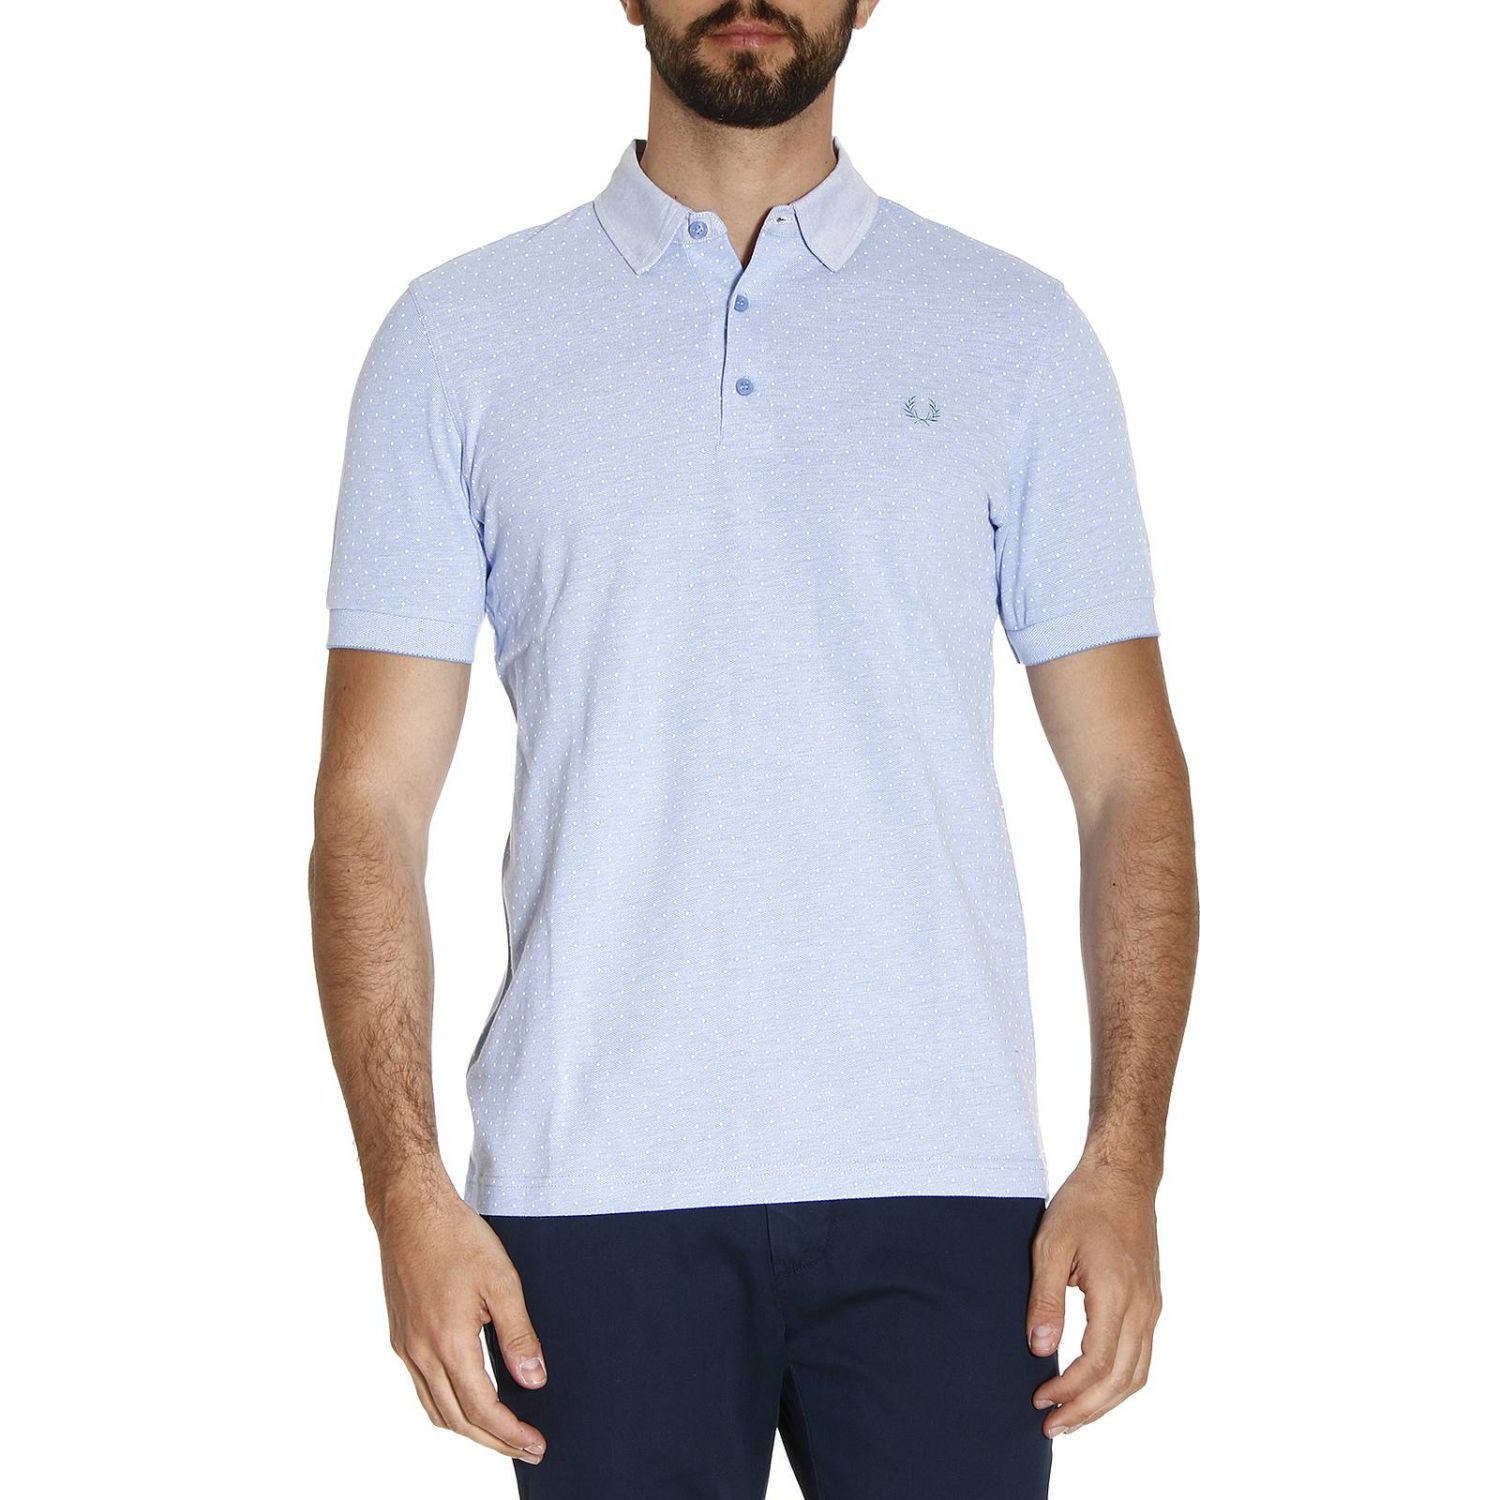 T-Shirt Fred Perry Men | T-Shirt Men Fred Perry M1574 Giglio EN